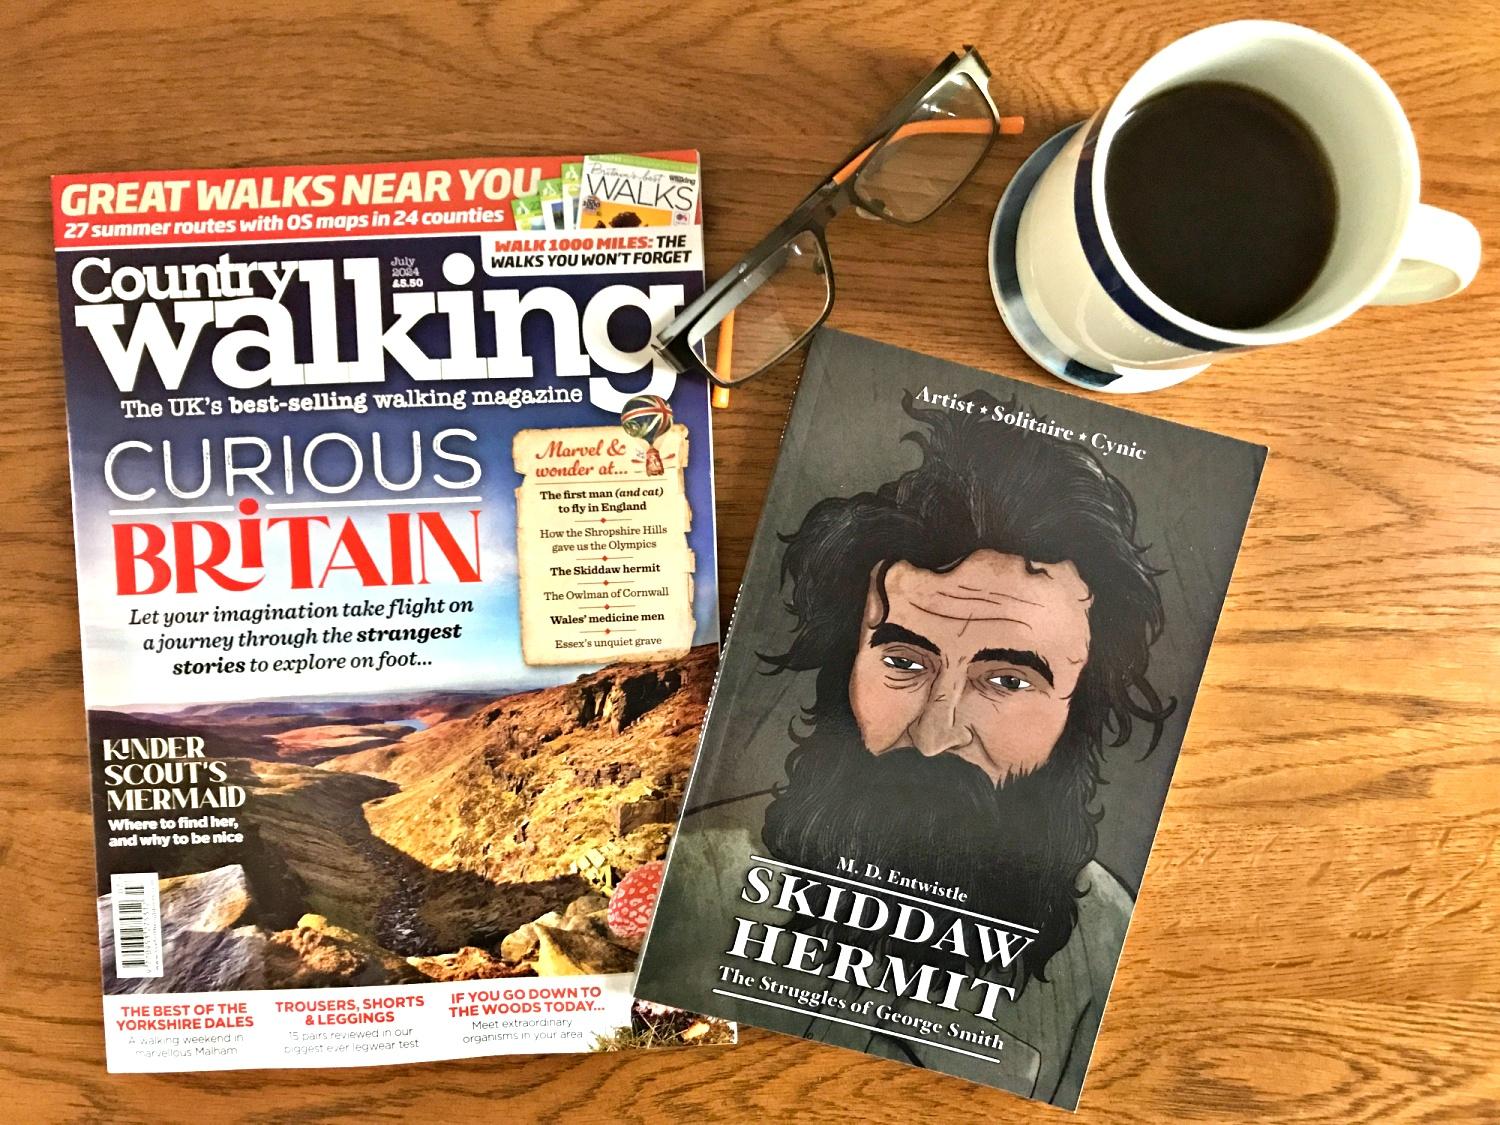 Country Walking Magazine with a copy of Skiddaw Hermit: The Struggles of George Smith